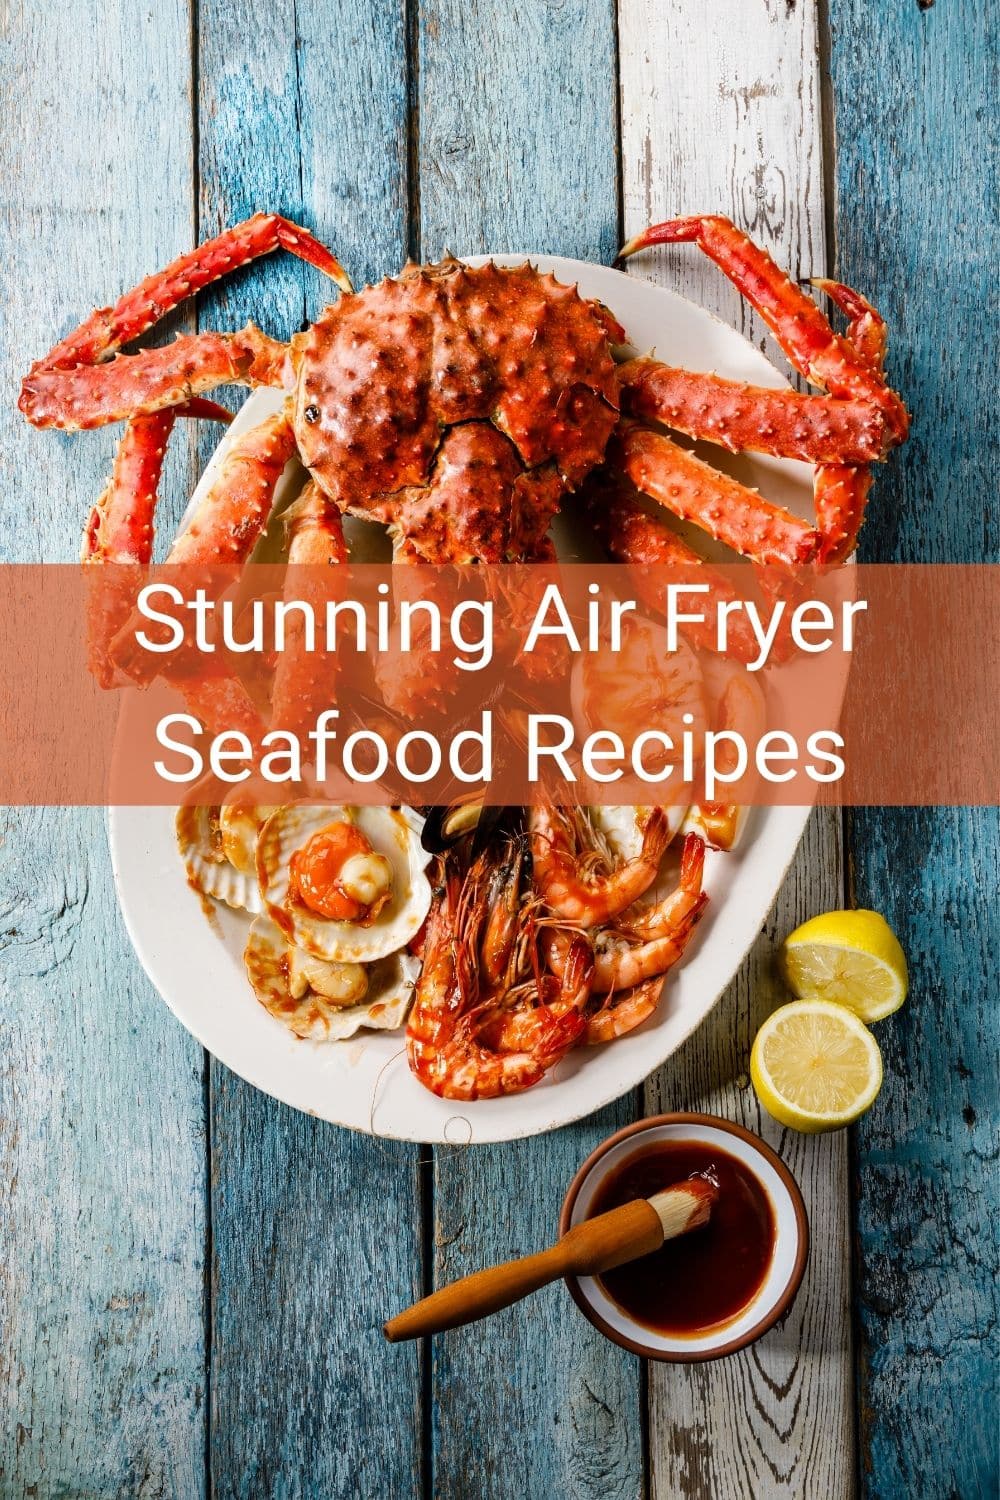 Stunning Air Fryer Seafood Recipes